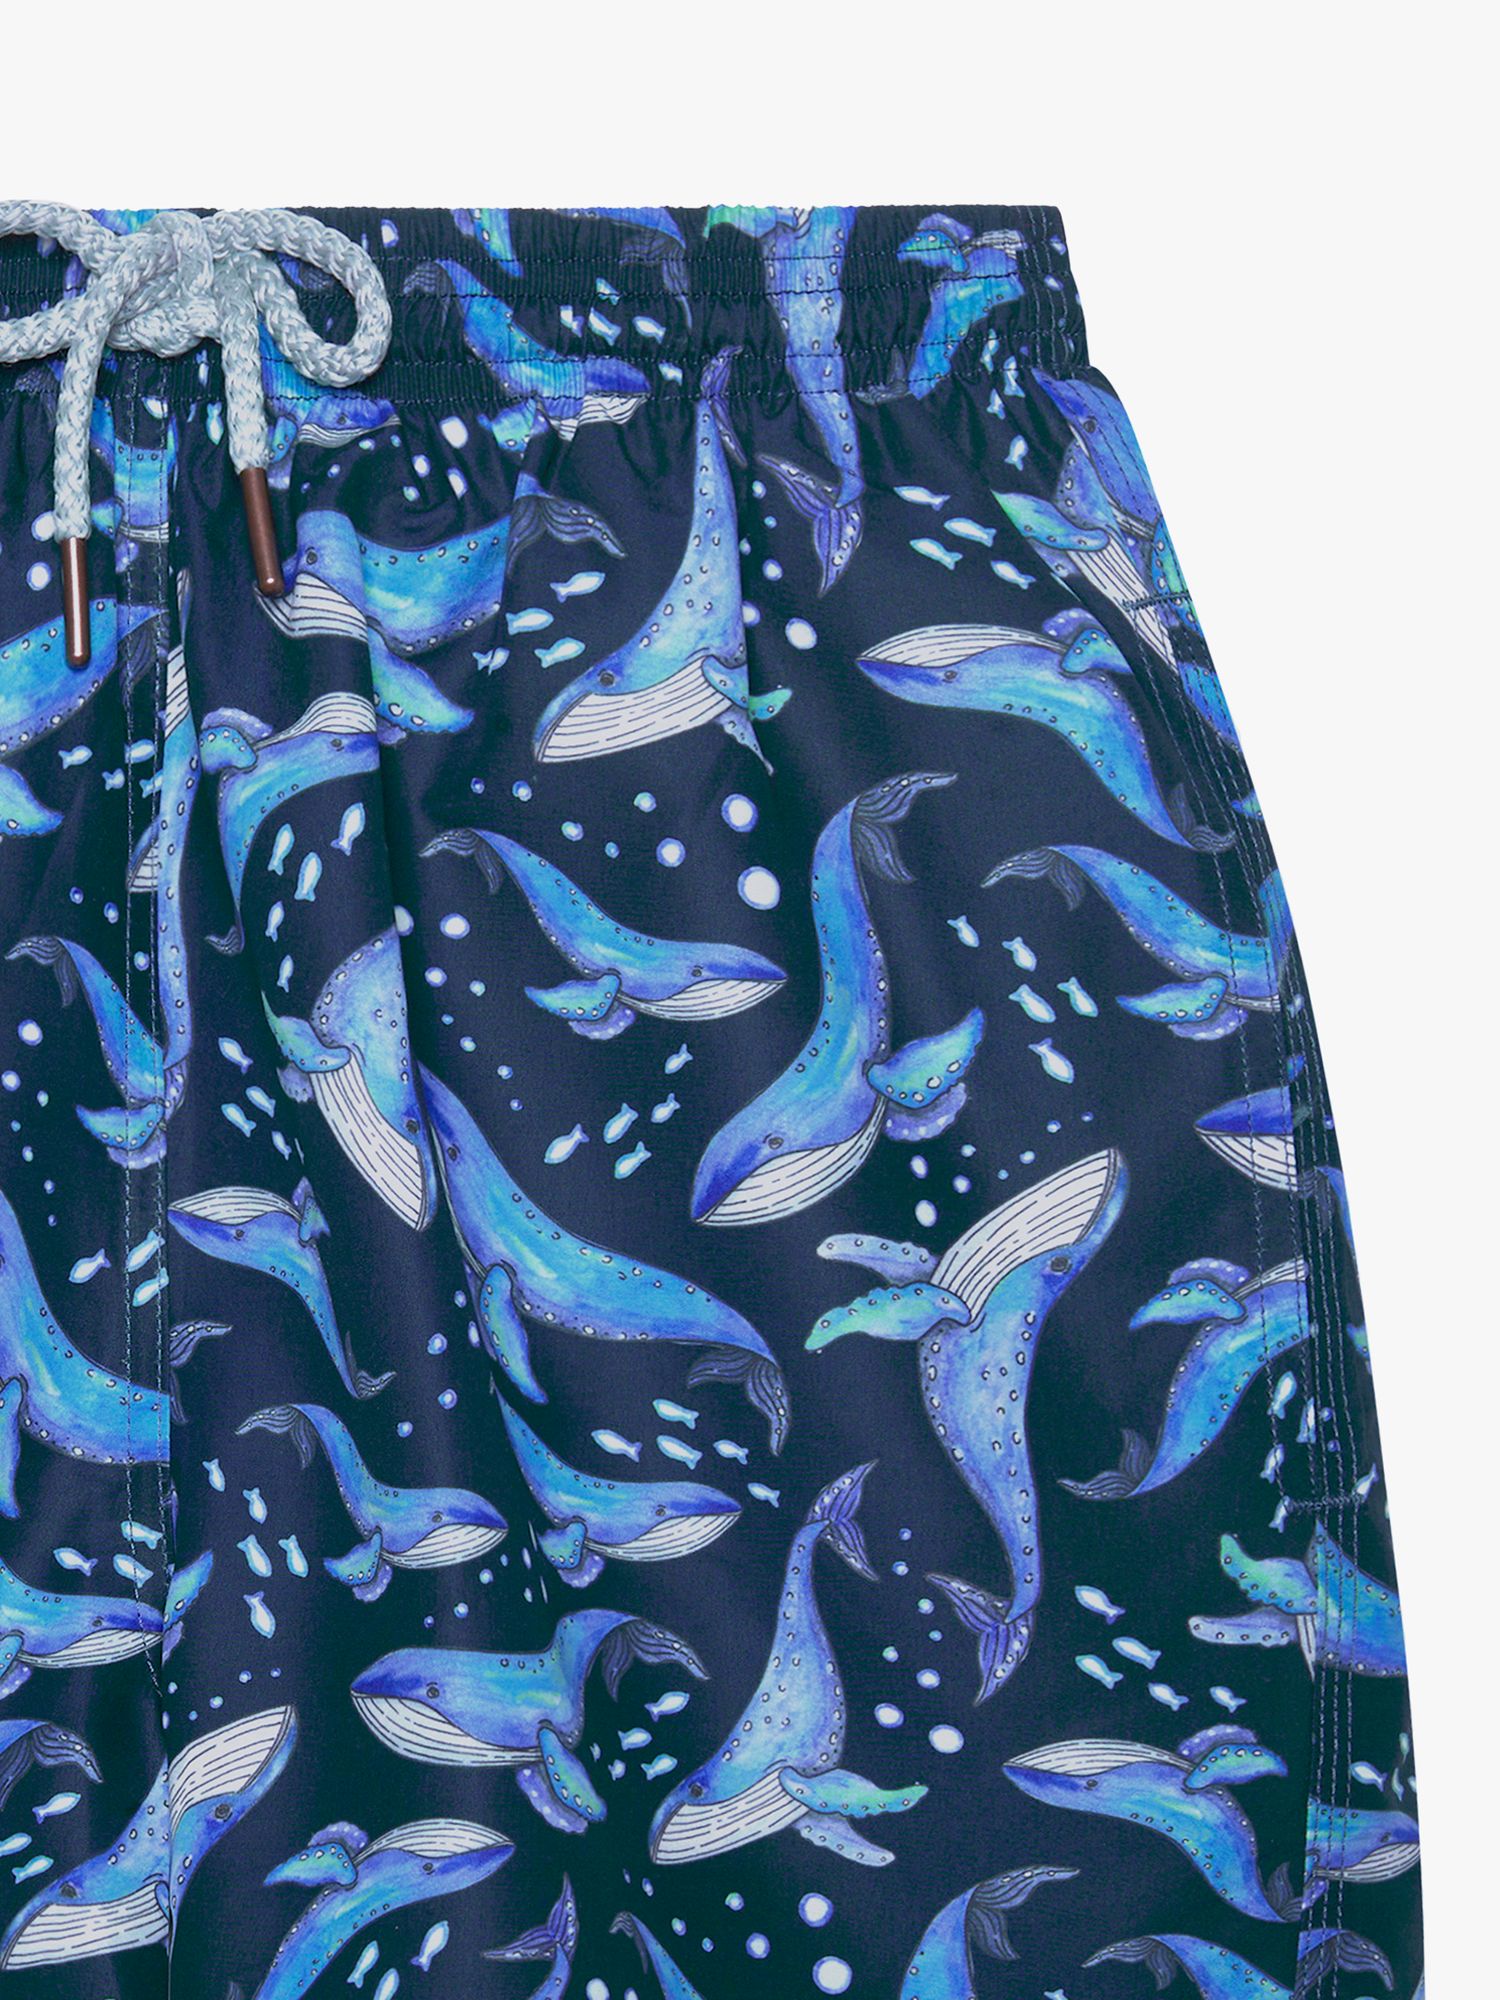 Buy Trotters Whale Swim Shorts, Navy/Whale Online at johnlewis.com